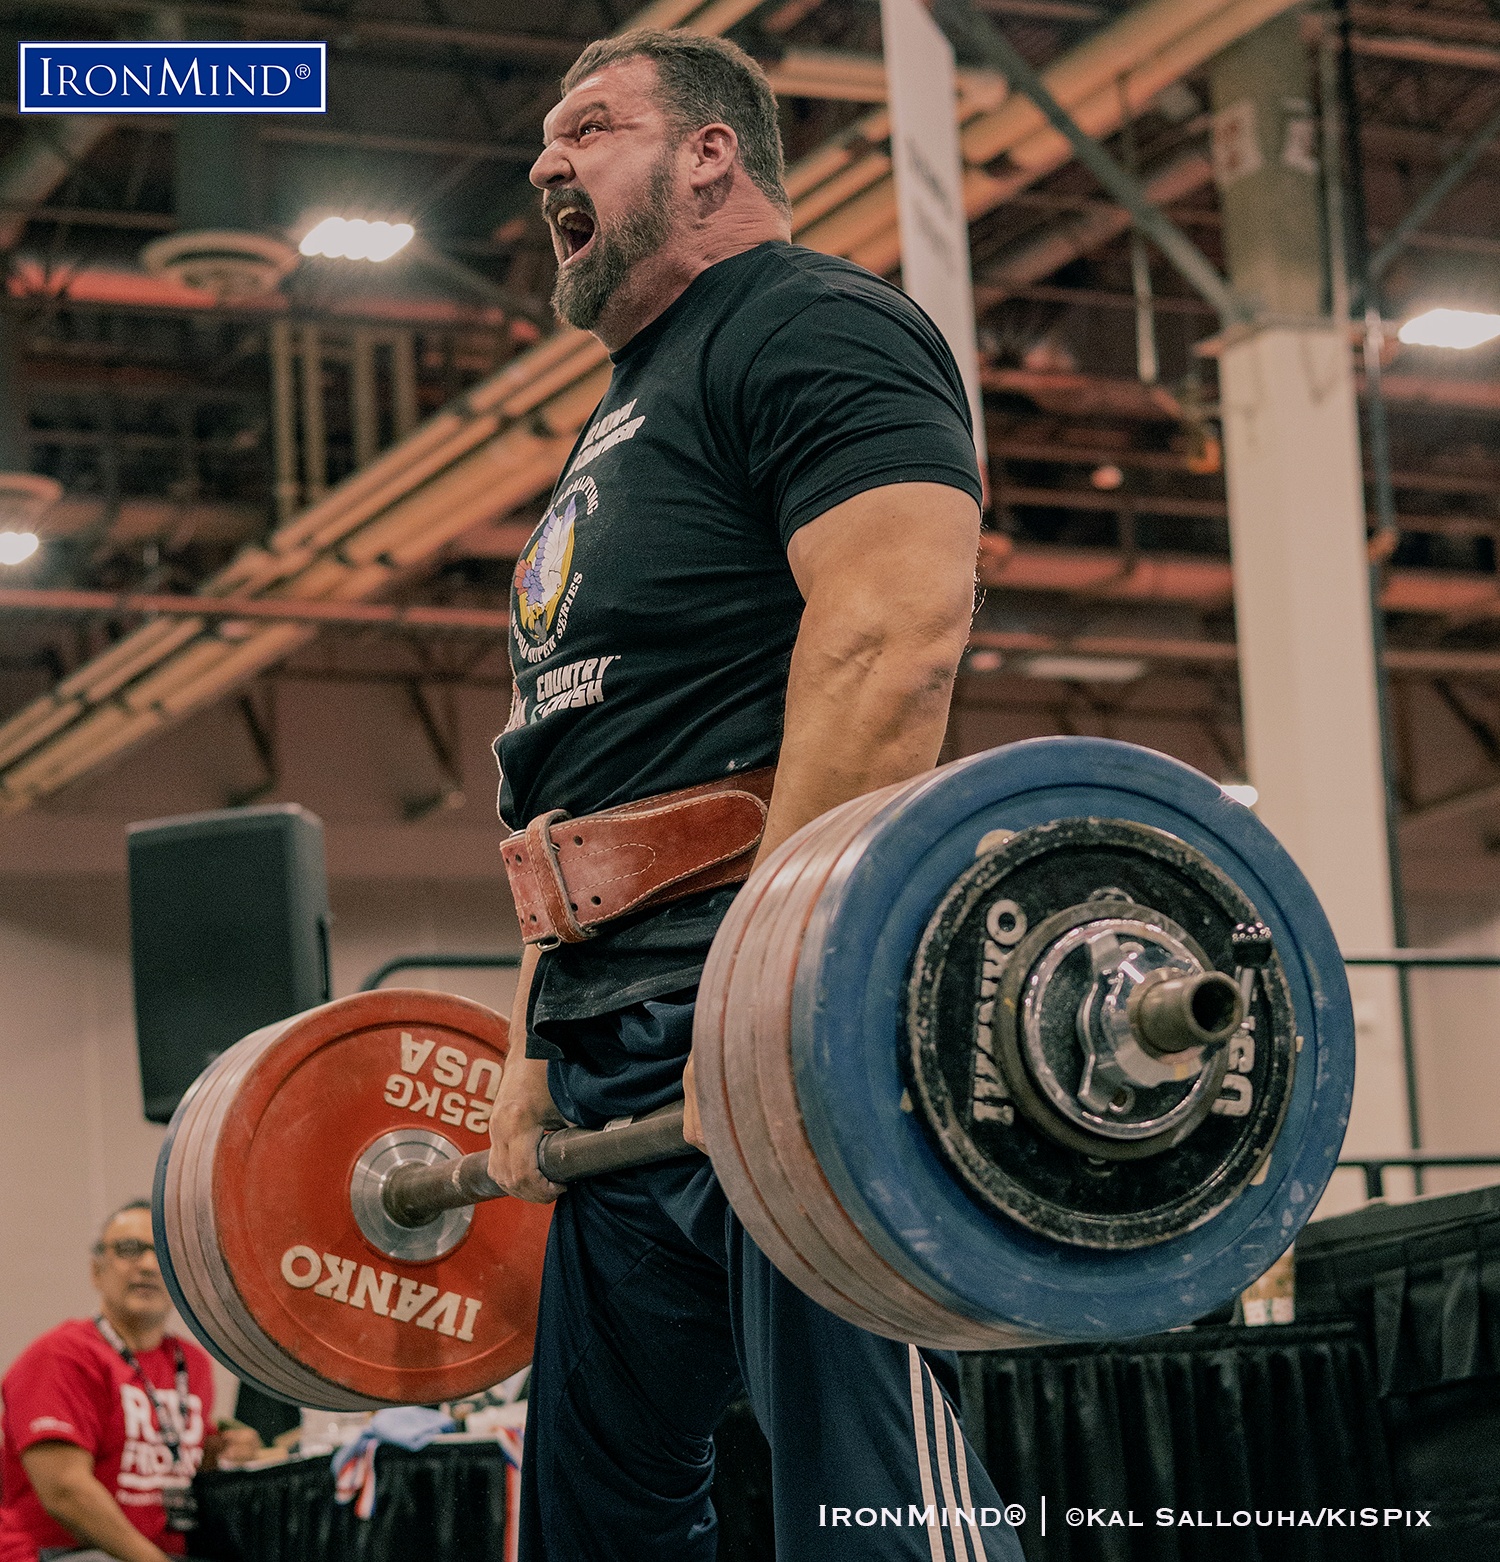 Elite gripster Carl Myerscough has added to his considerable laurels in the grip strength world by breaking one of the most coveted world records as he hit this huge 237.5 kg on the IronMind Apollon’s Axle. IronMind® | ©Kal Sallouha/KiSPix/@osmtraining